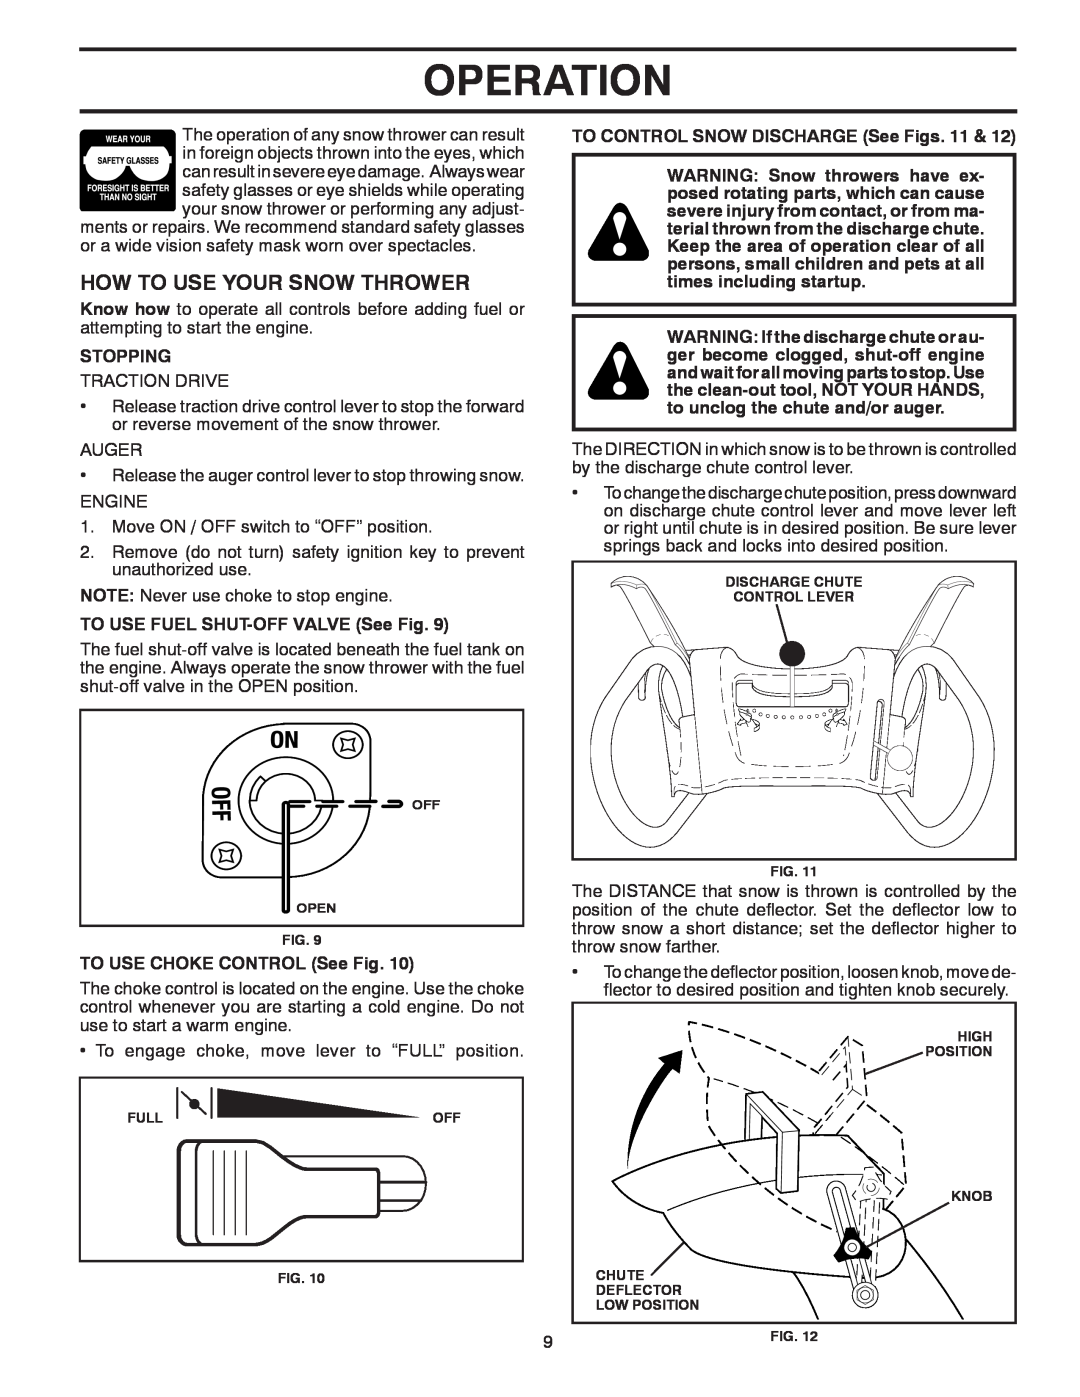 Poulan PR5524ESLCT, 424704 How To Use Your Snow Thrower, Operation, Stopping, TO USE FUEL SHUT-OFF VALVE See Fig 